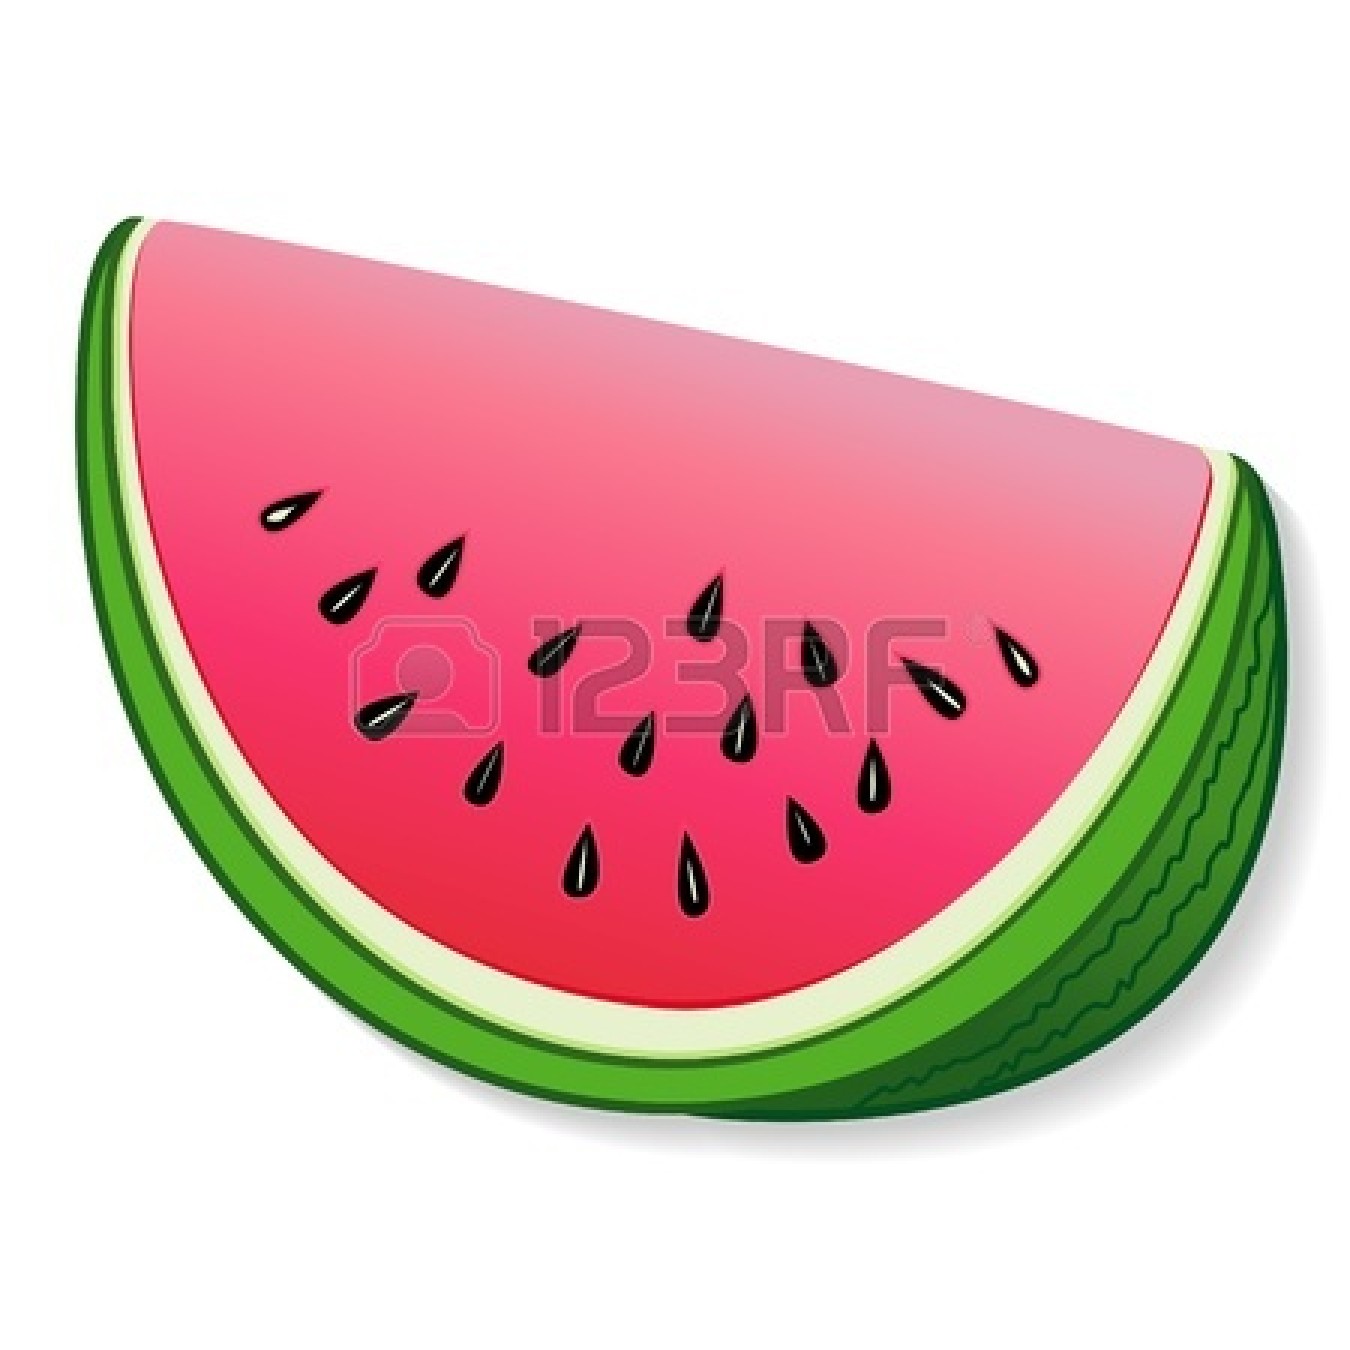 Watermelon Seeds   Clipart Panda   Free Clipart Images